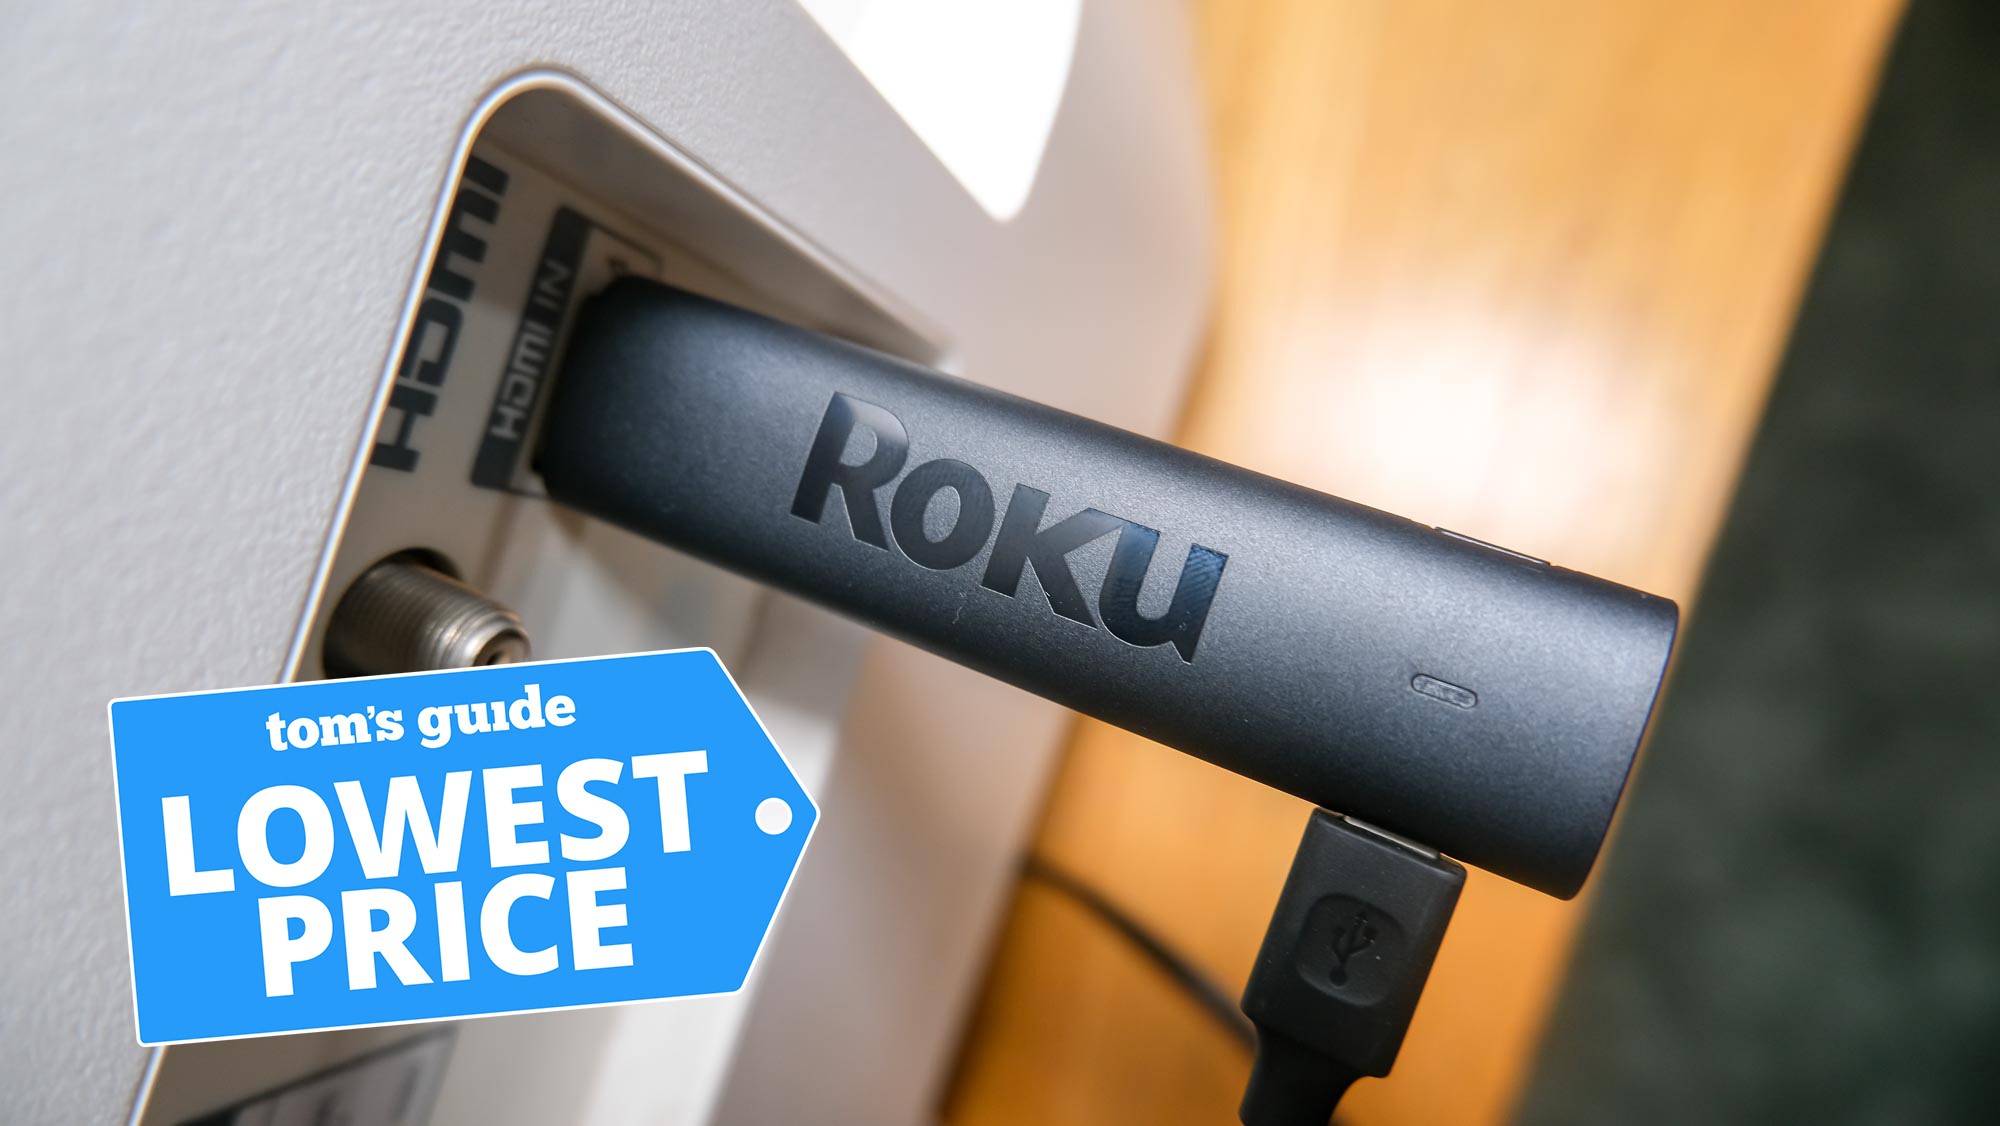 The Roku Streaming Stick 4K plugged into an HDMI port with a Tom's Guide Lowest Price graphic on top